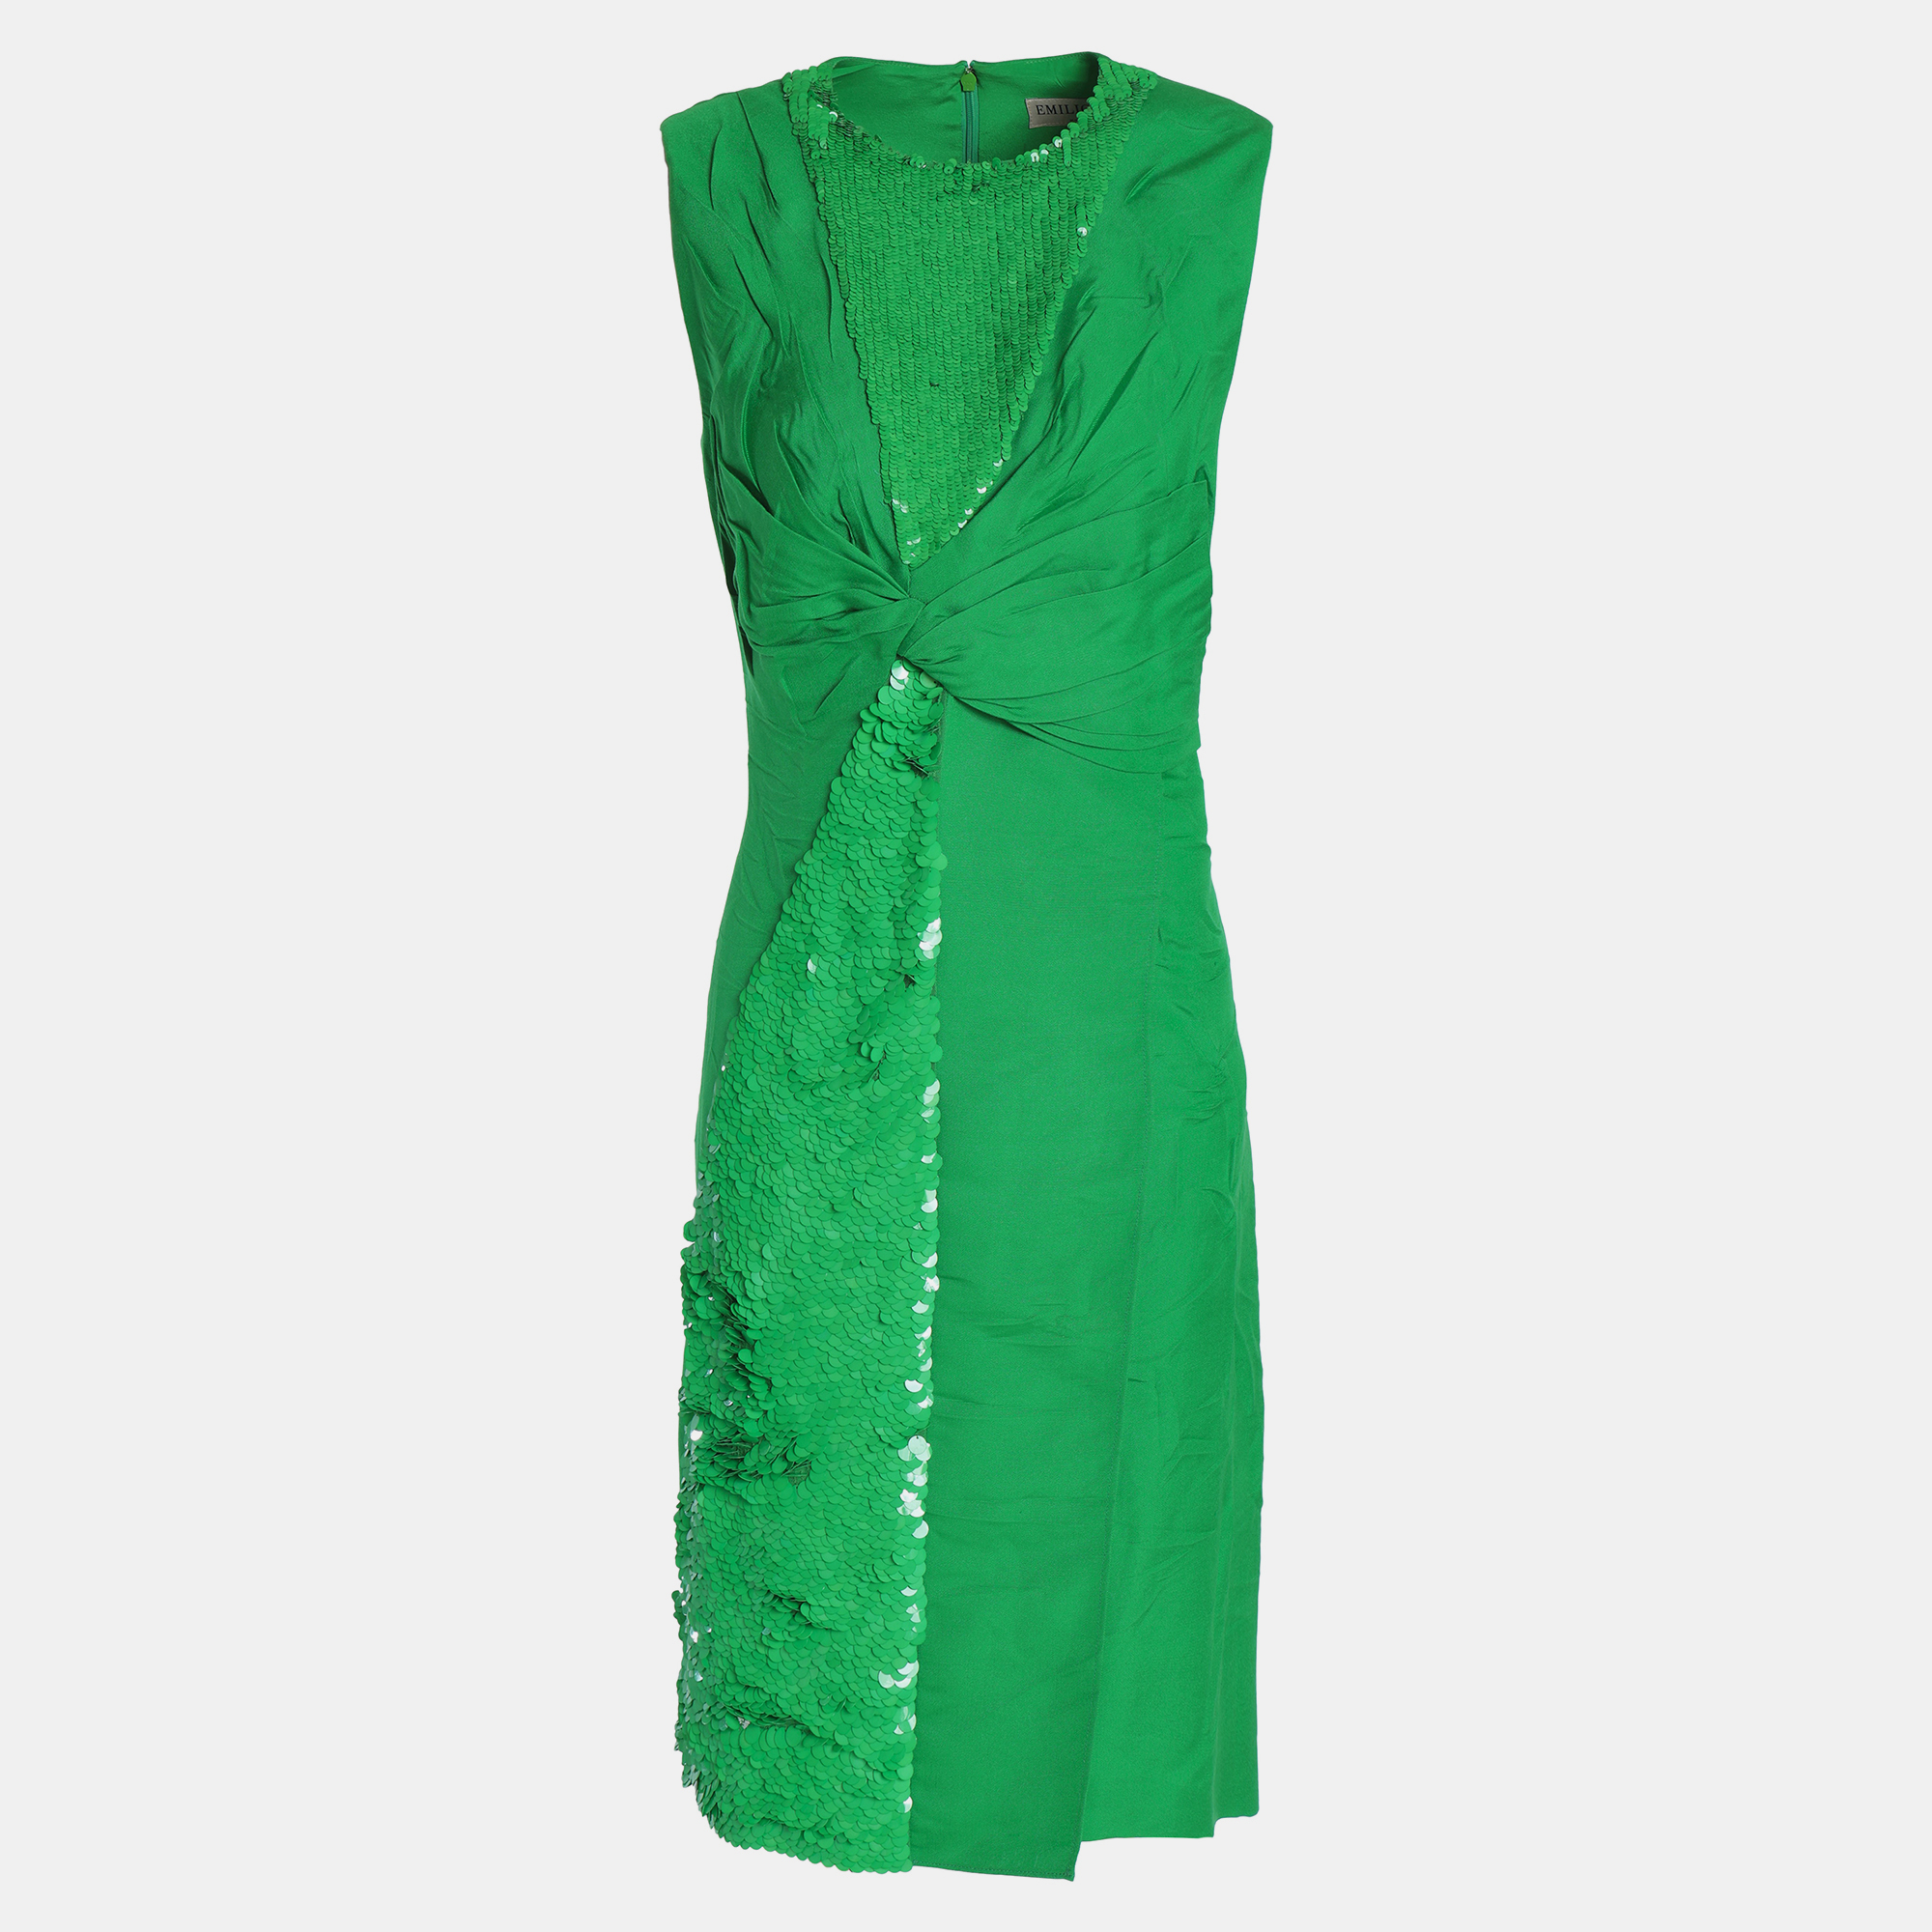 Emilio pucci polyester knee length dress 38